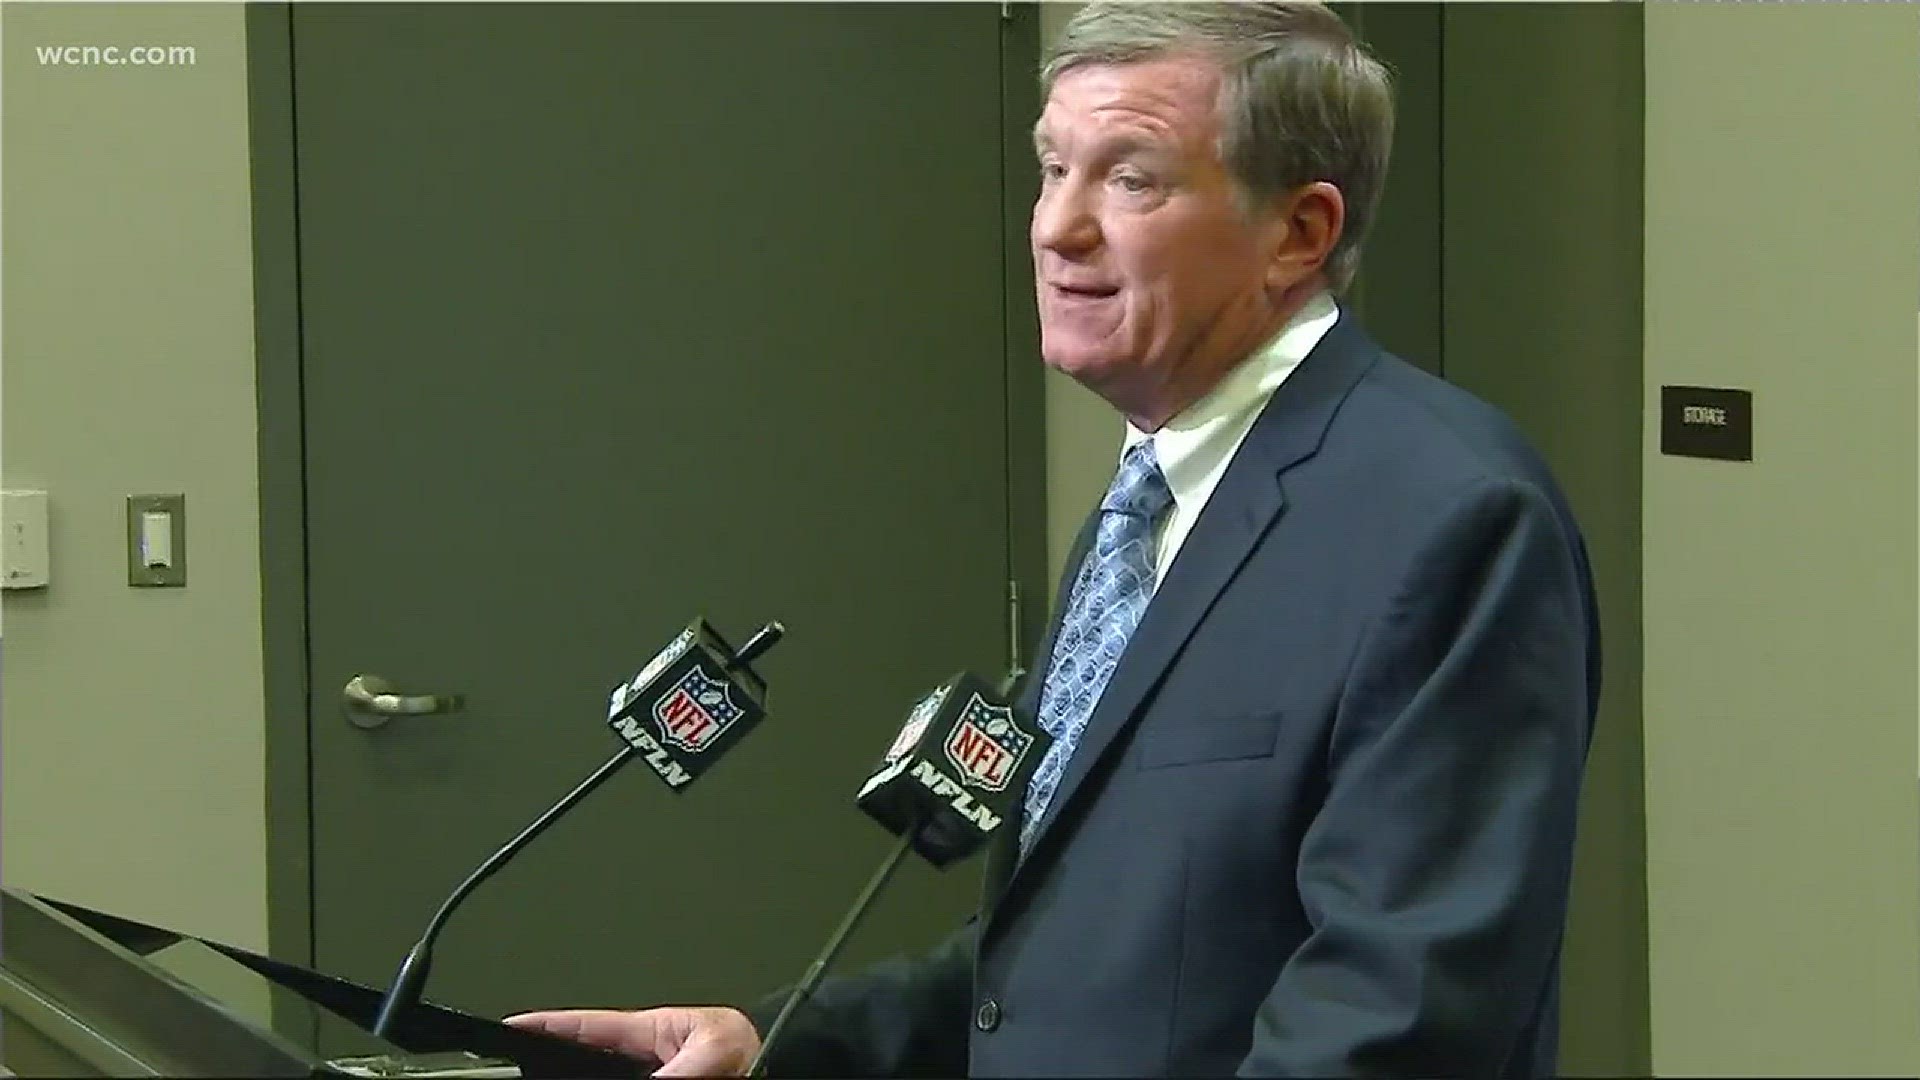 Panthers Interim GM Marty Hurney has been placed on administrative leave after his ex-wife accused him of harassment.